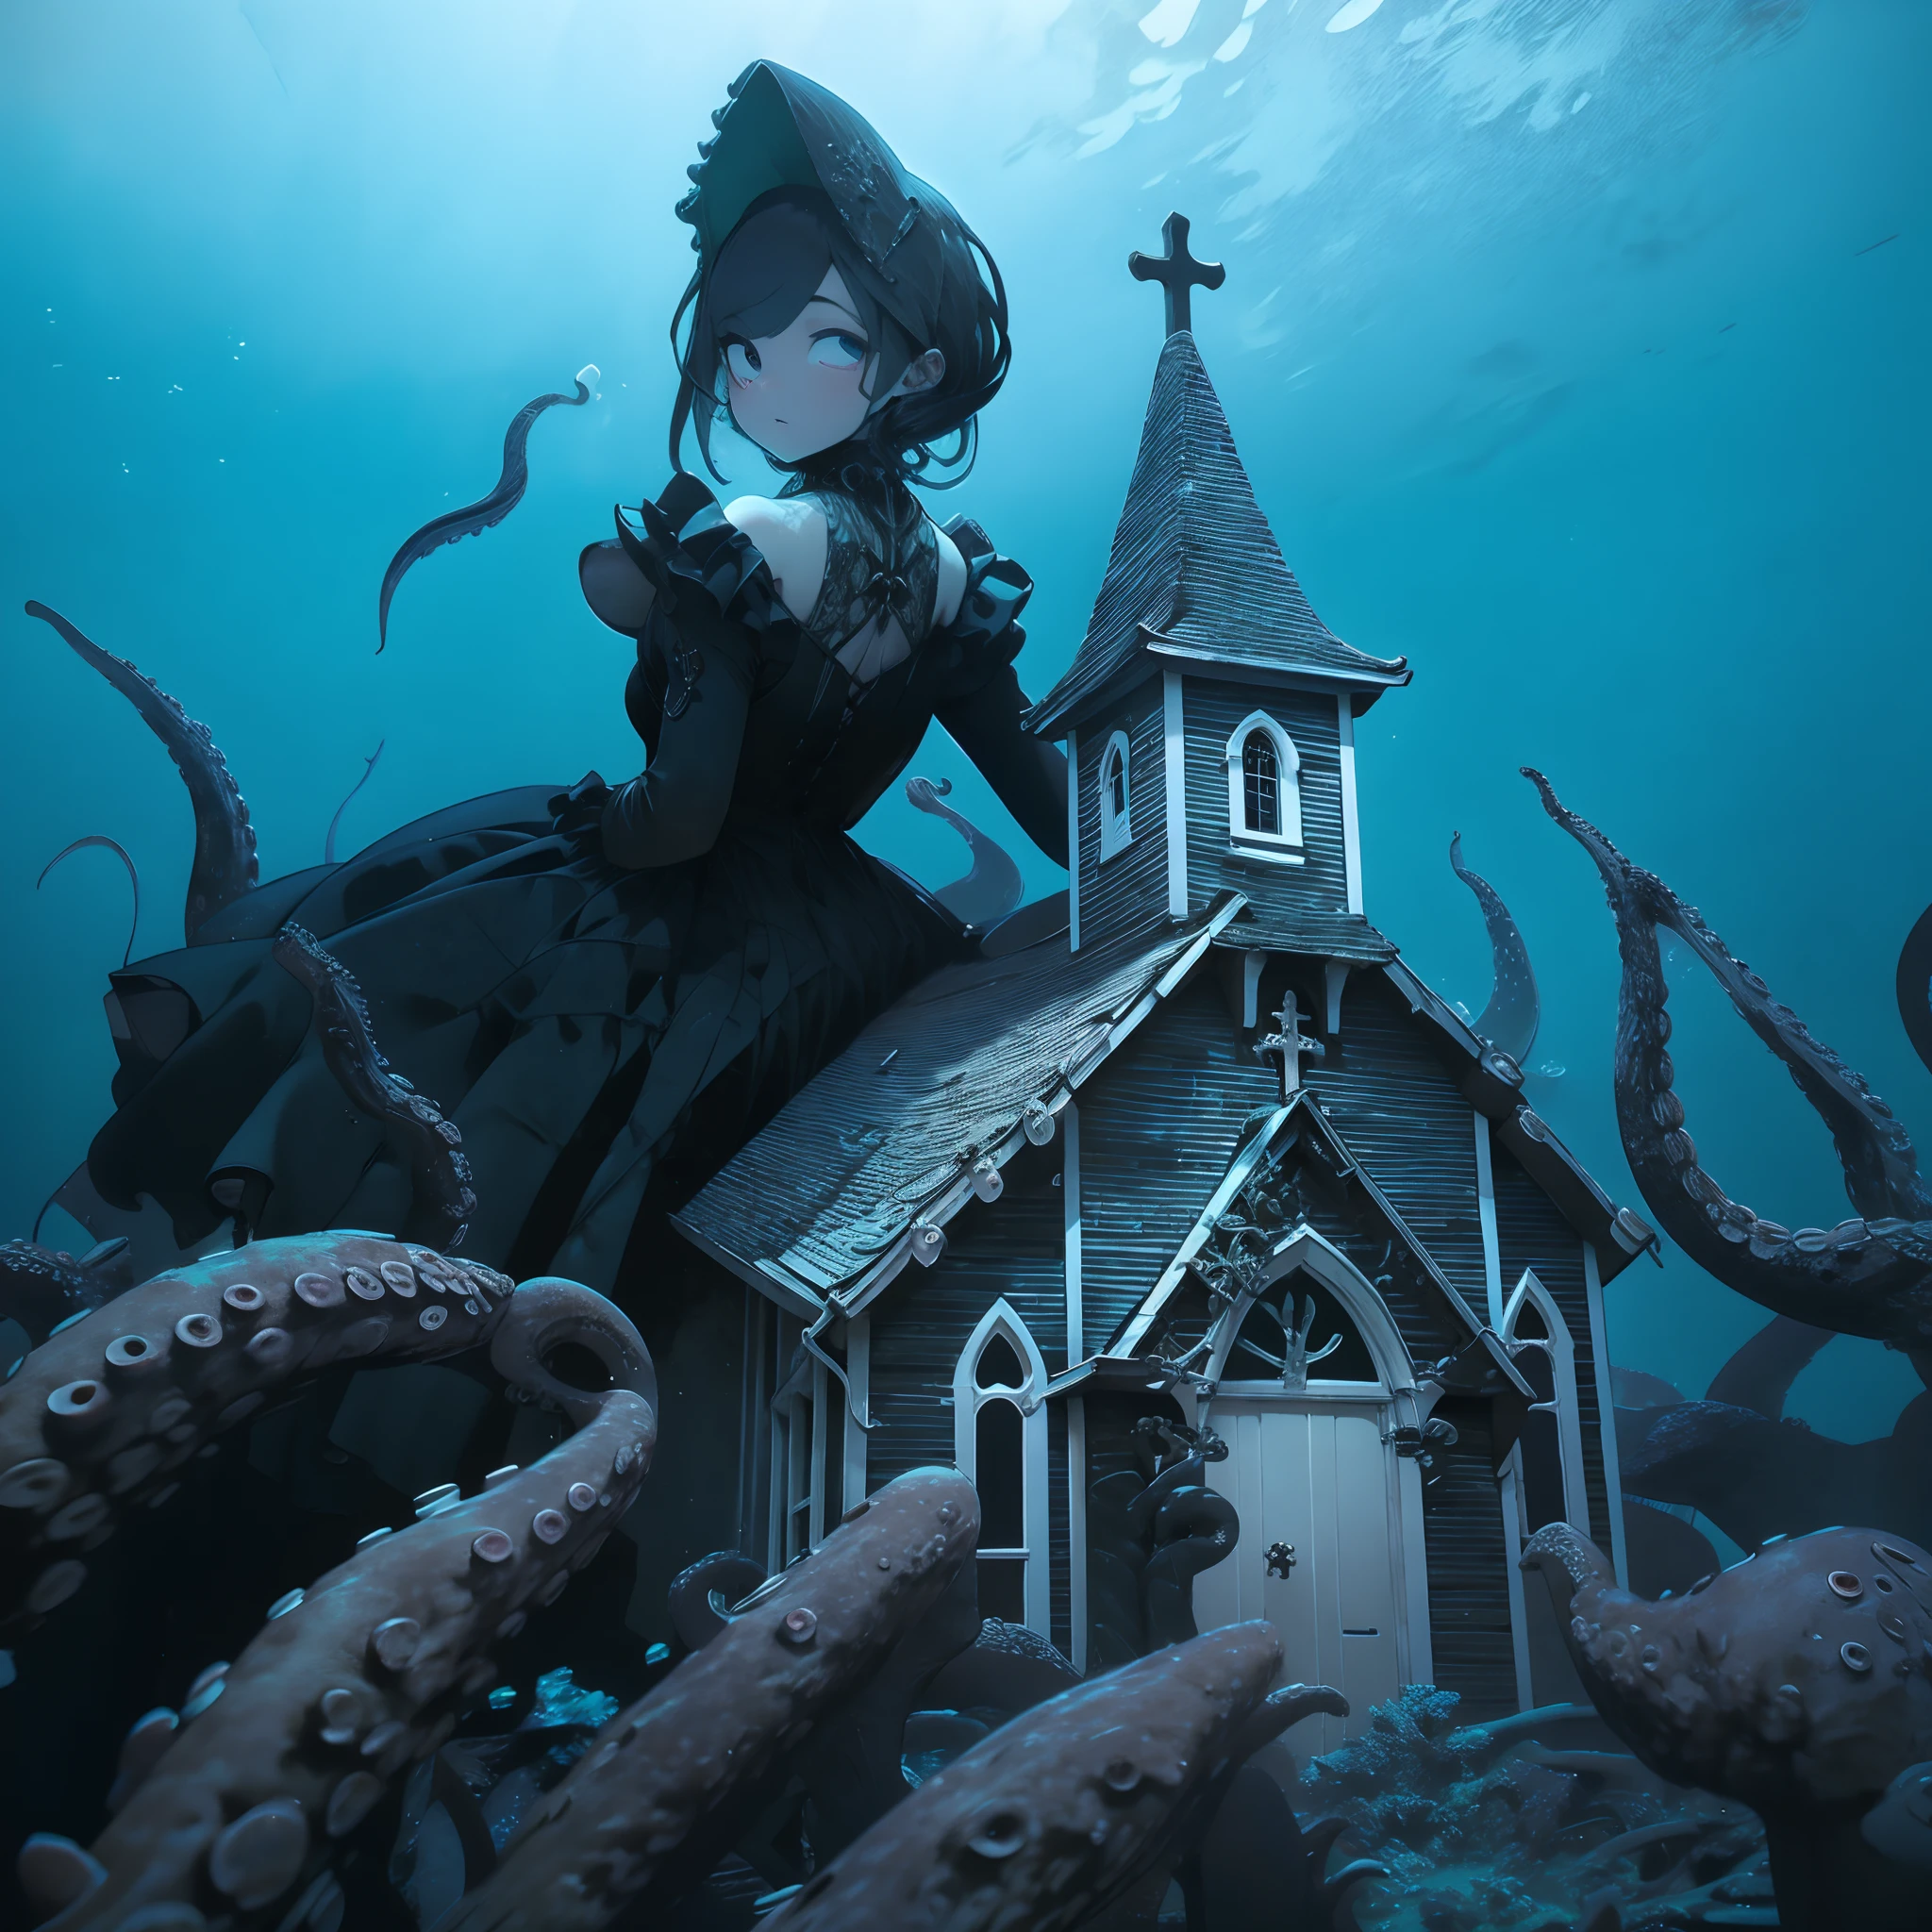 Undersea Church. She's a girl leaning out from behind the church. She's a huge girl. She wears a gothic dress. Tentacles enveloping the church.